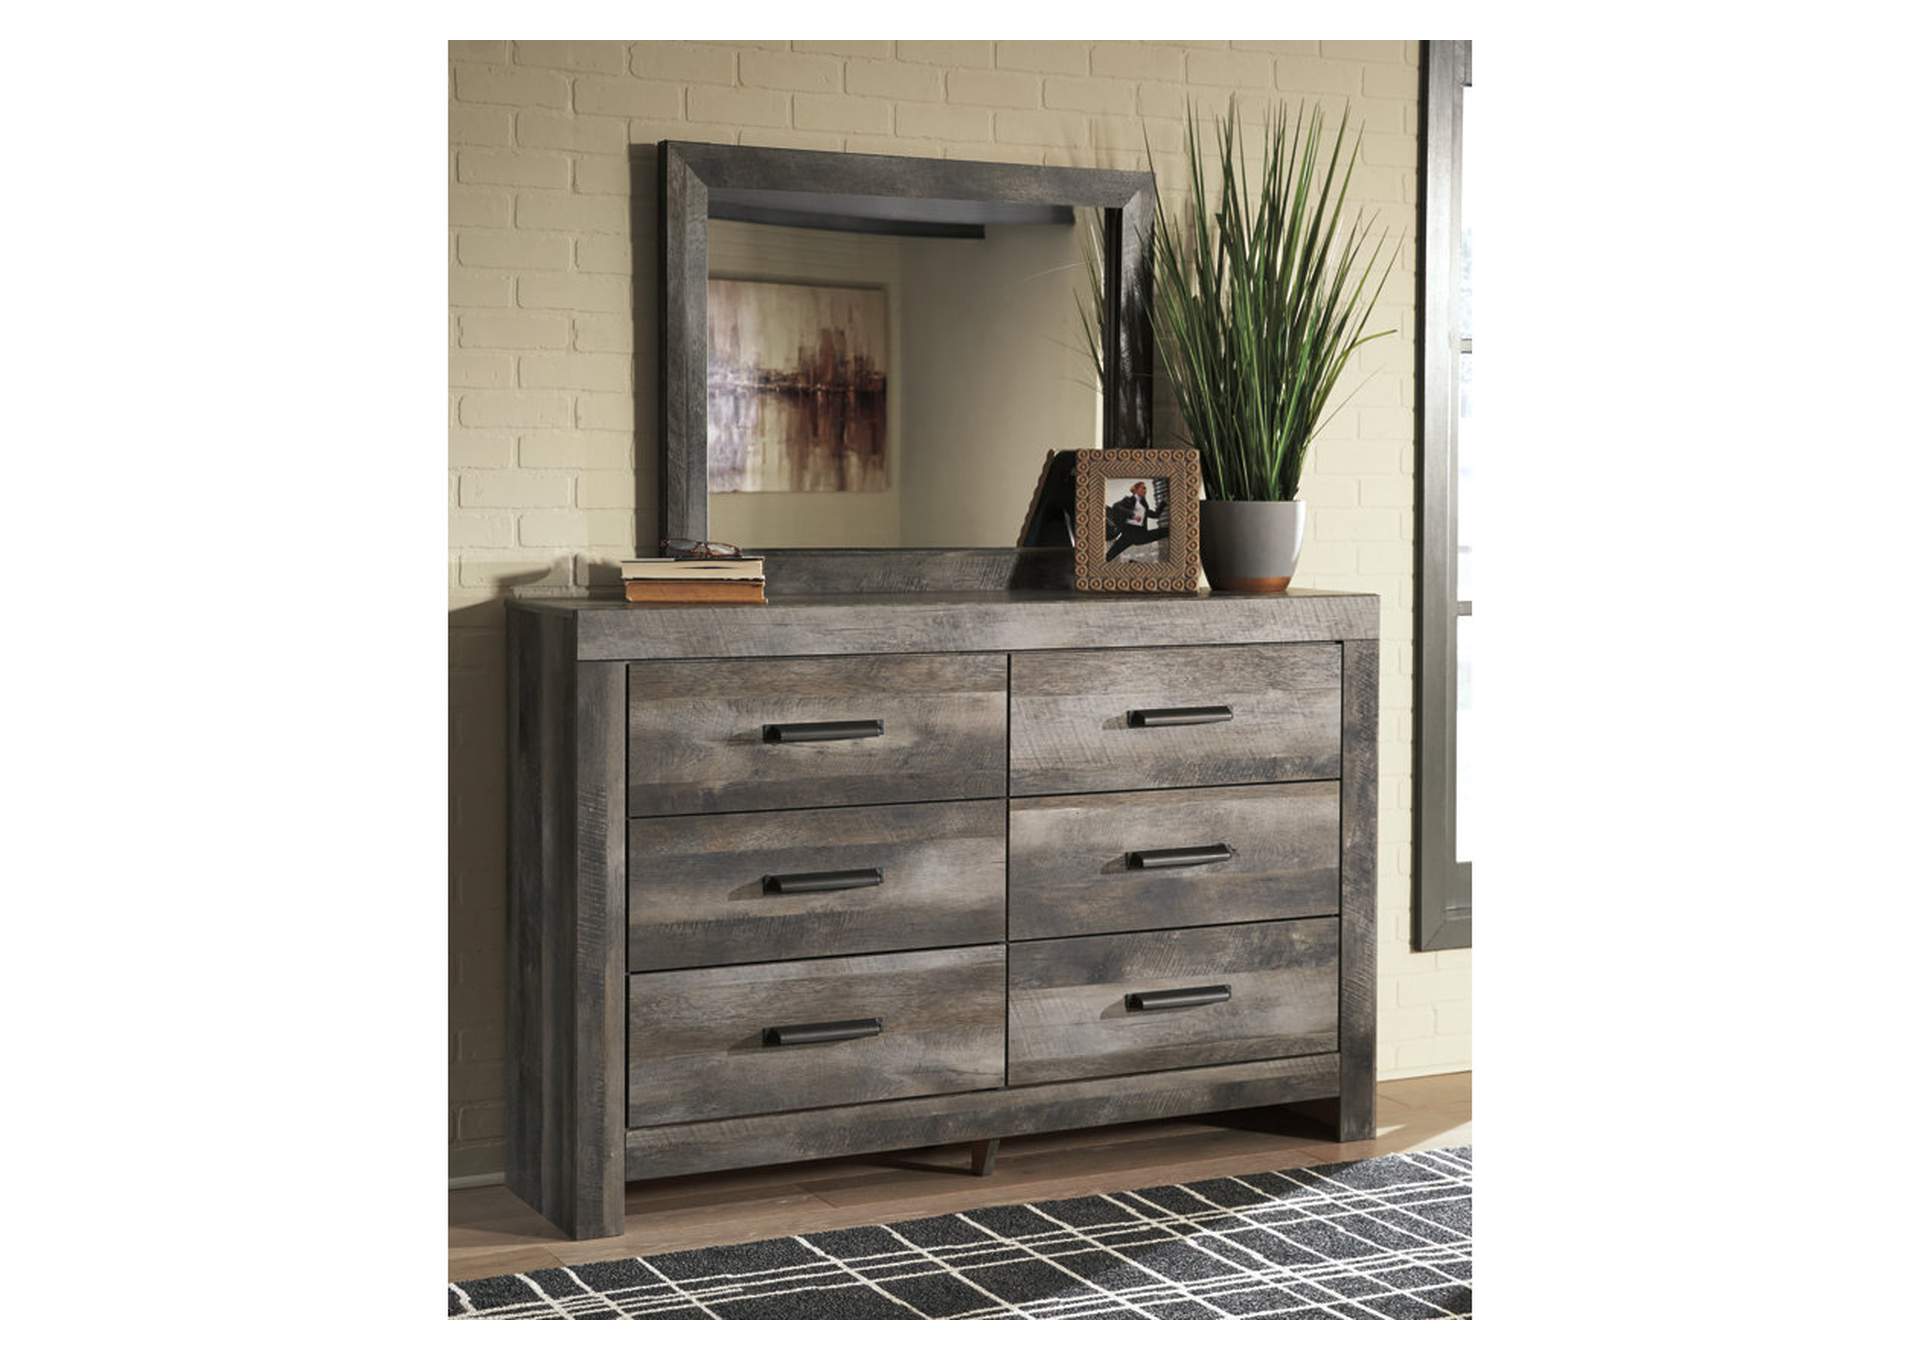 Wynnlow King Poster Bed, Dresser, Mirror and Nightstand,Signature Design By Ashley